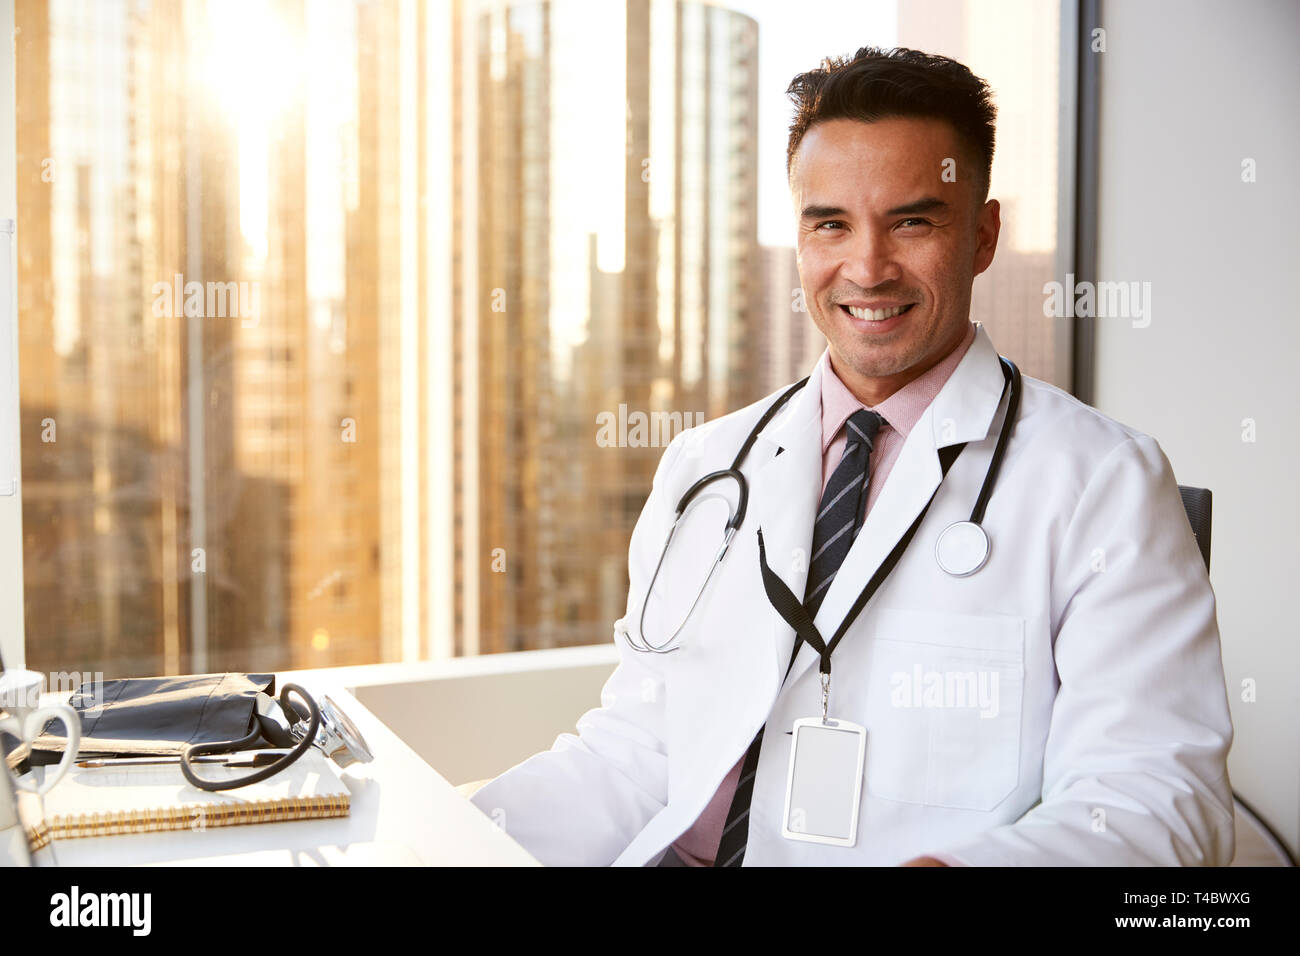 Portrait Of Smiling Male Doctor Wearing White Coat With Stethoscope In Hospital Office Stock Photo